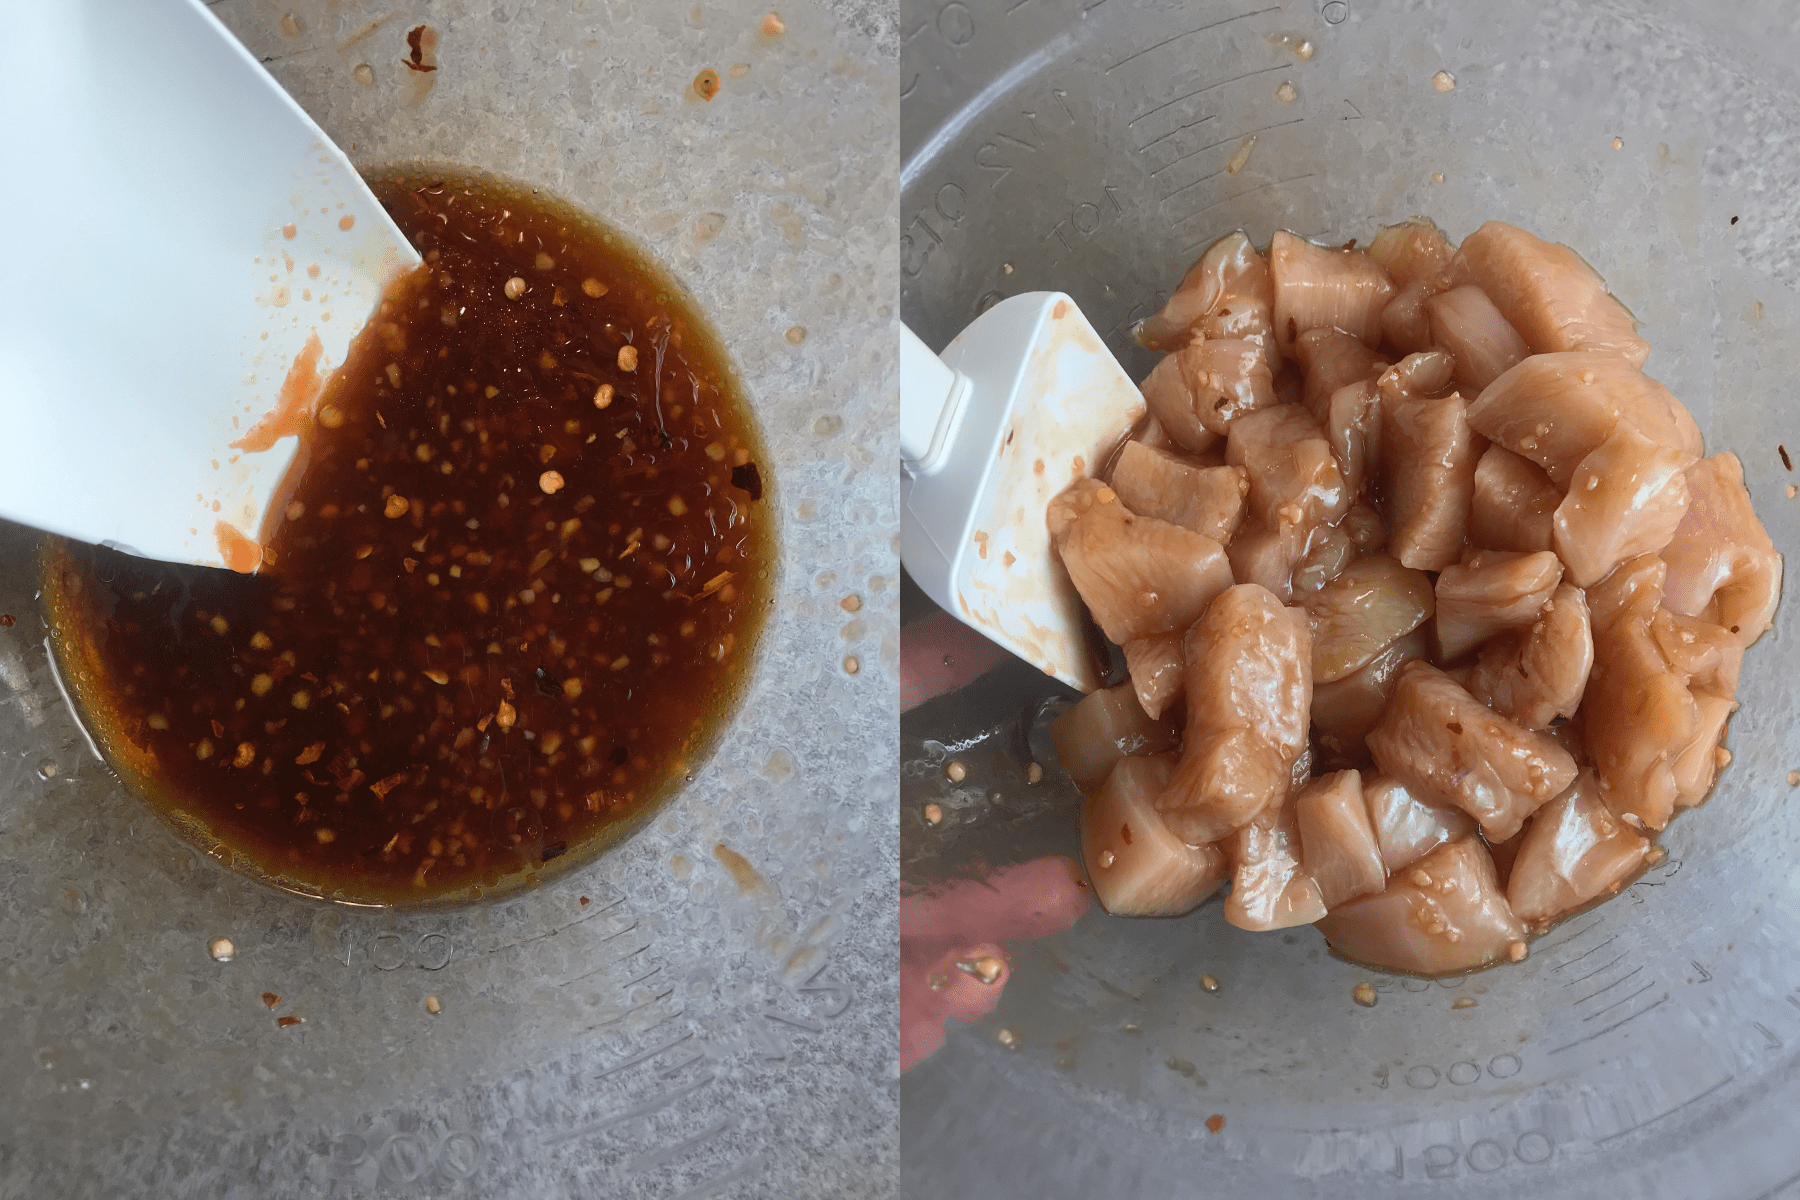 Simple marinade for chicken made of ingredients you probably already have on hand.